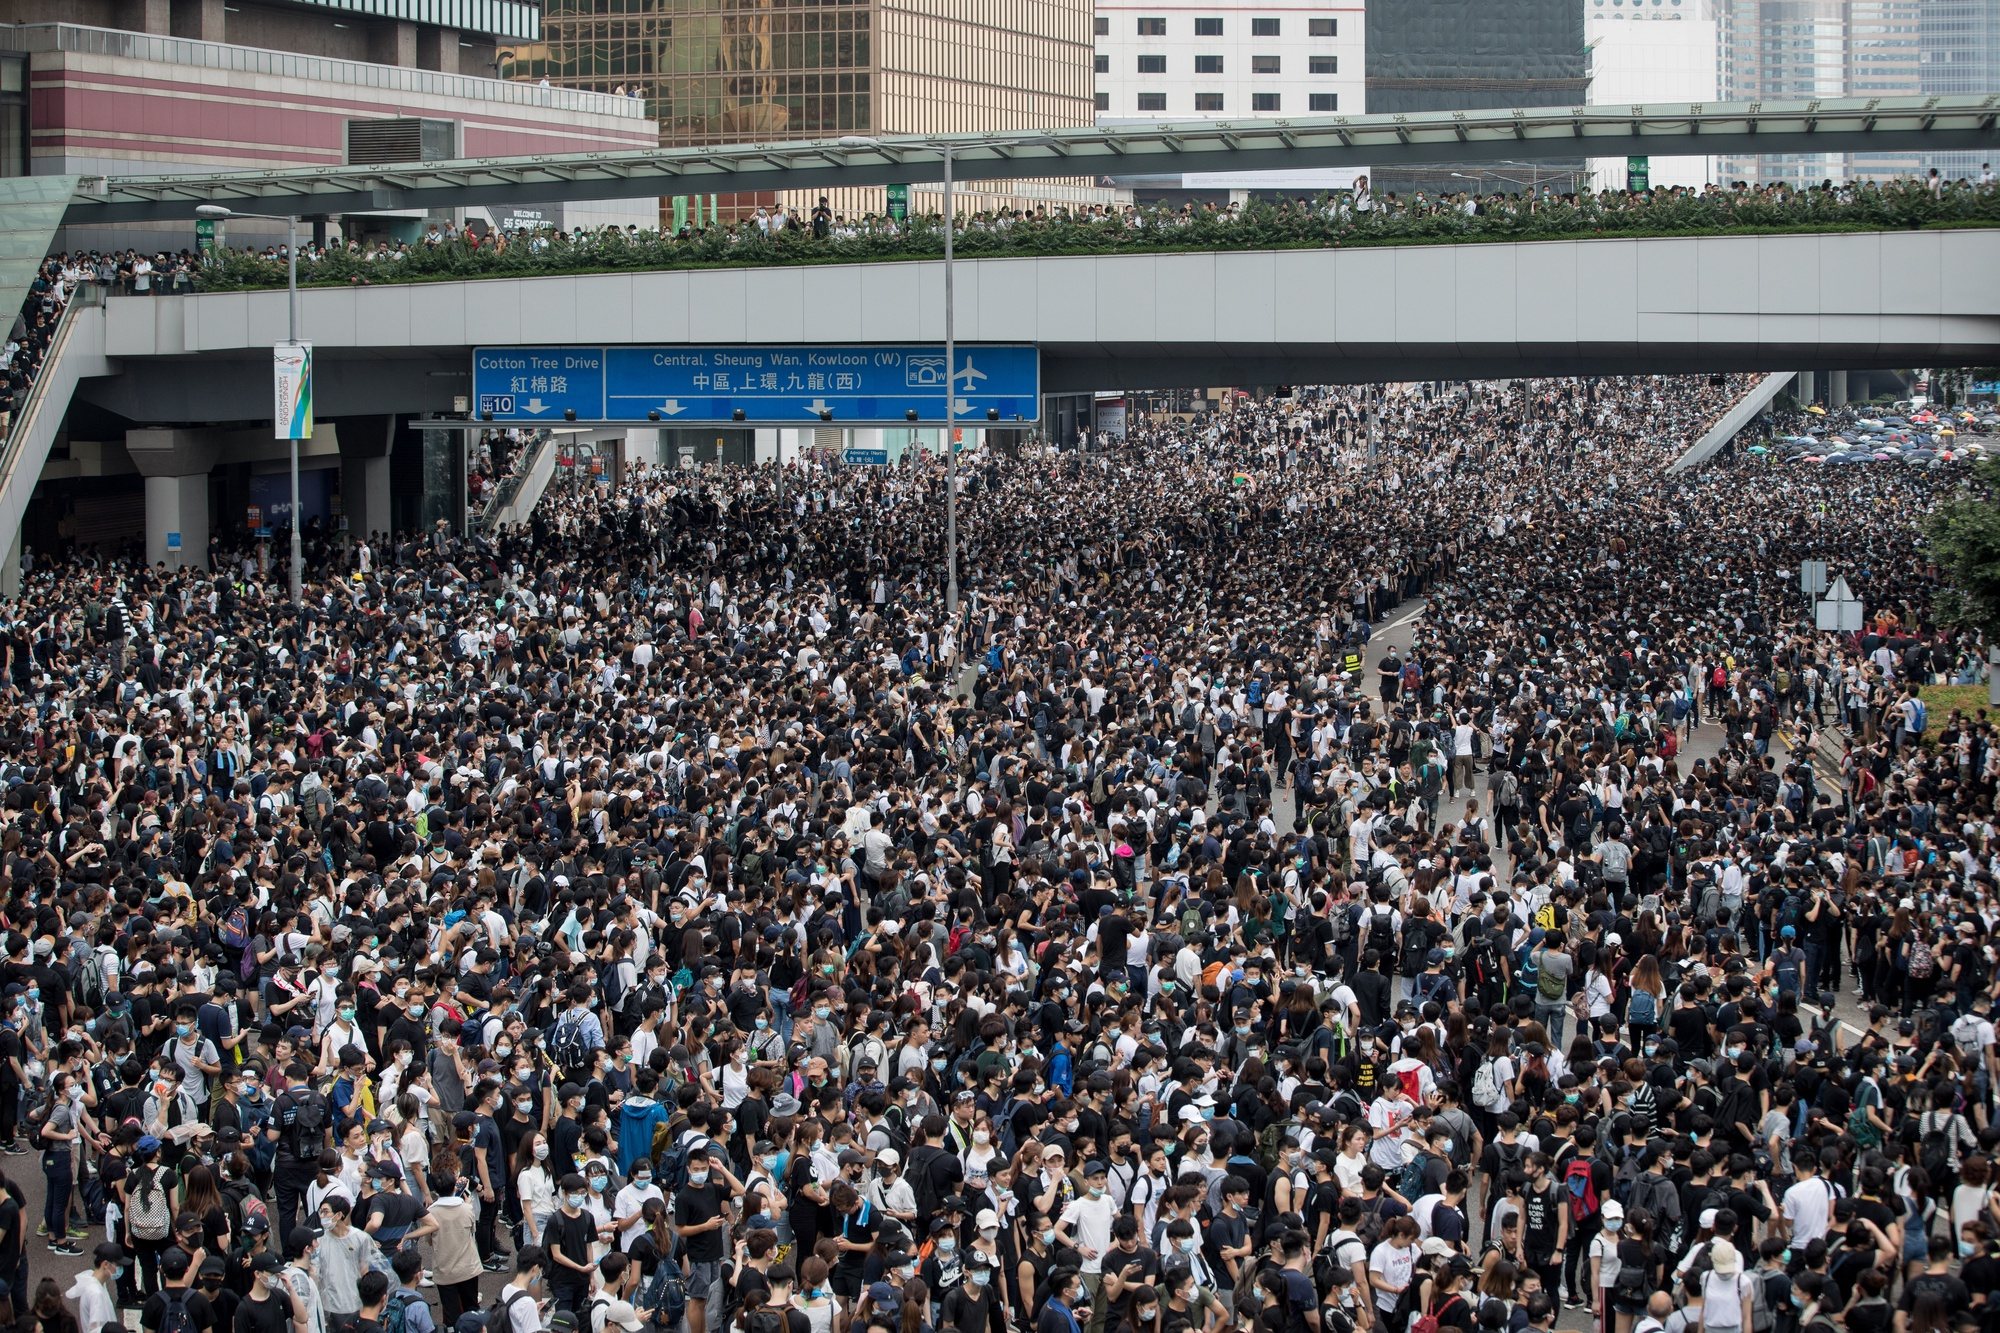 epa09261432 (FILE) Protesters take part in a rally against an extradition bill outside the Legislative Council in Hong Kong, China, 12 June 2019 (reissued 11 June 2021). June 12 marks the second anniversary of the protest movement against the bill which faced immense opposition and would allow the transfer of fugitives to jurisdictions which Hong Kong does not have a treaty with, including mainland China.  EPA/JEROME FAVRE *** Local Caption *** 55267110